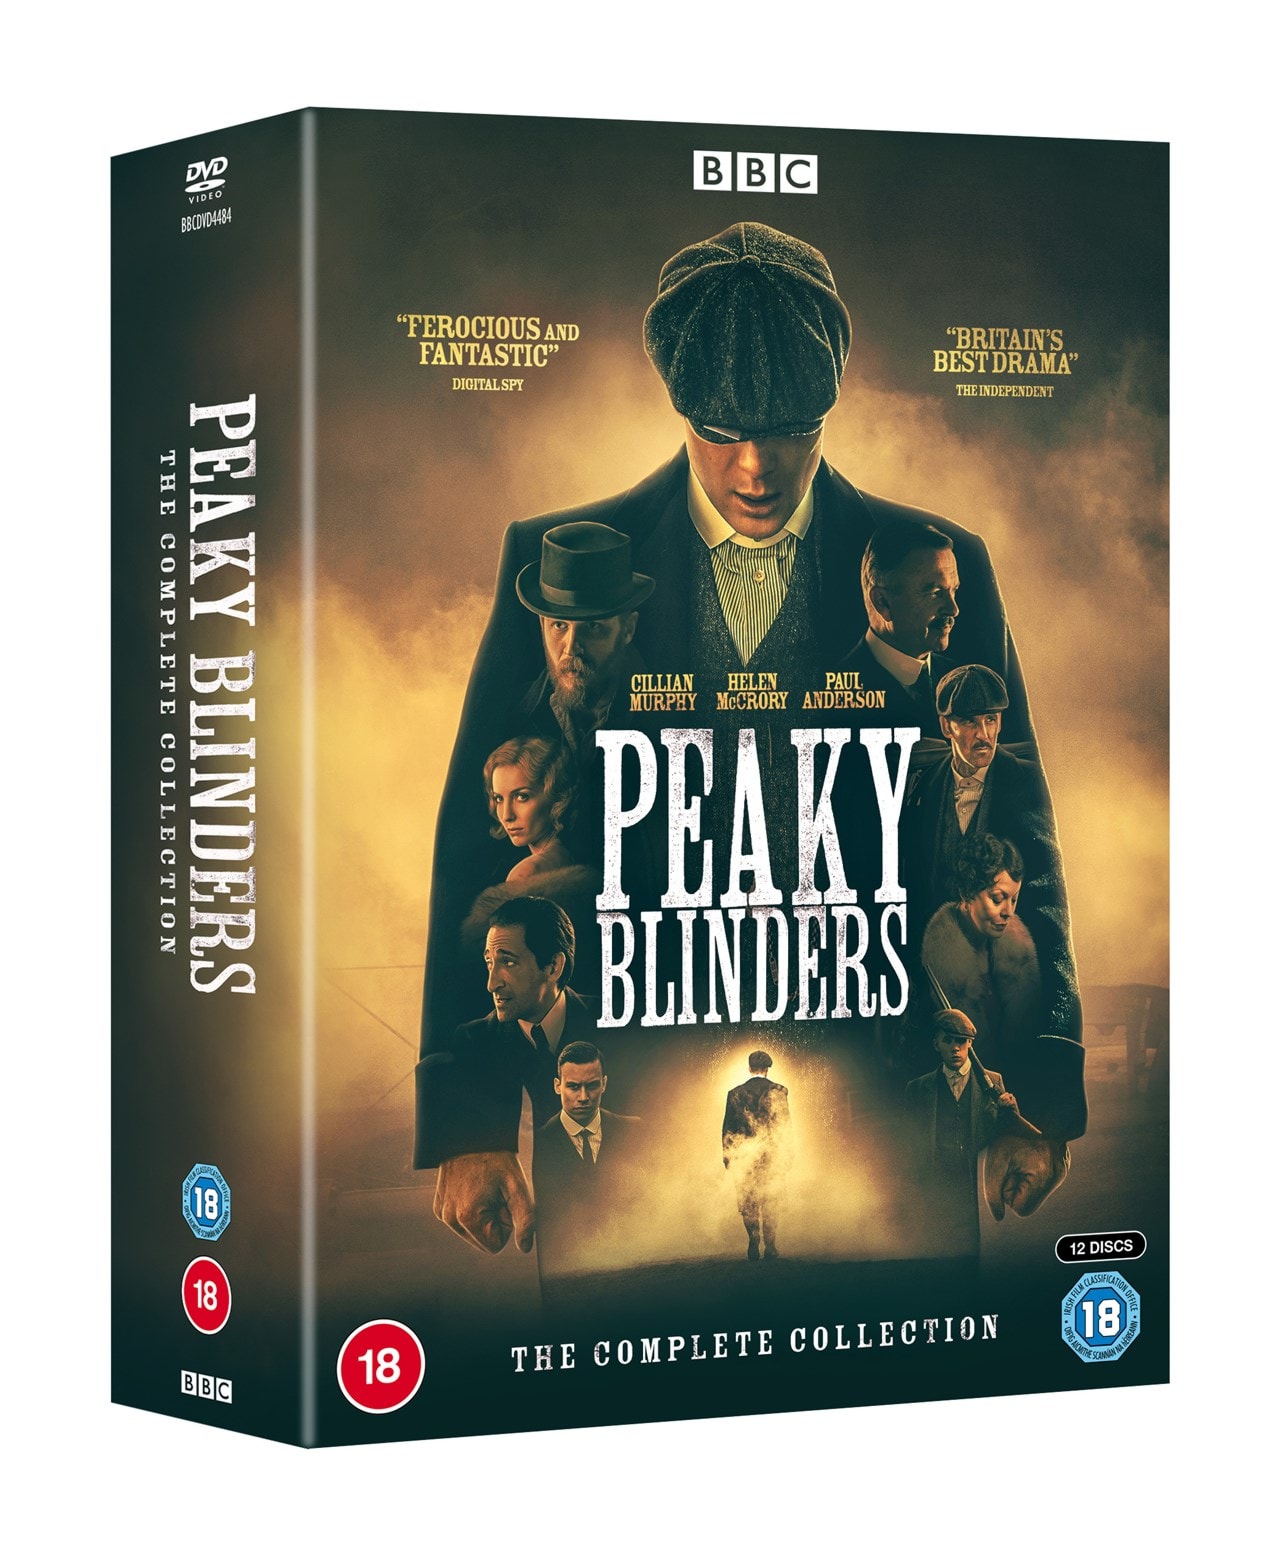 Peaky Blinders The Complete Collection Dvd Box Set Free Shipping Over £20 Hmv Store 